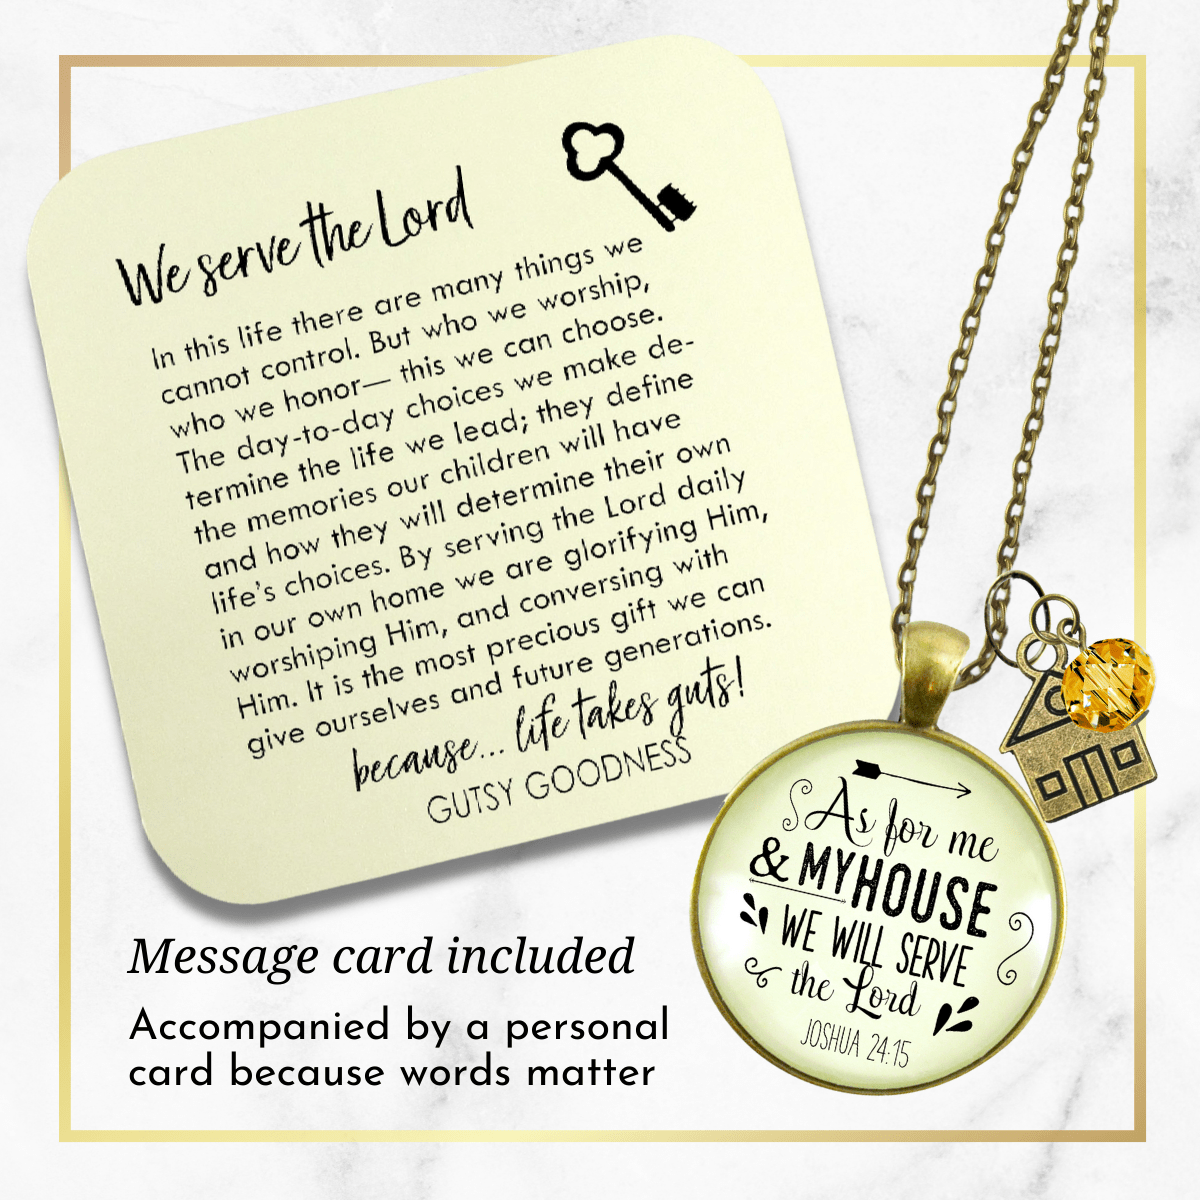 Gutsy Goodness As for My House We Will Serve the Lord Necklace Faith Charm Jewelry - Gutsy Goodness Handmade Jewelry;As For My House We Will Serve The Lord Necklace Faith Charm Jewelry - Gutsy Goodness Handmade Jewelry Gifts